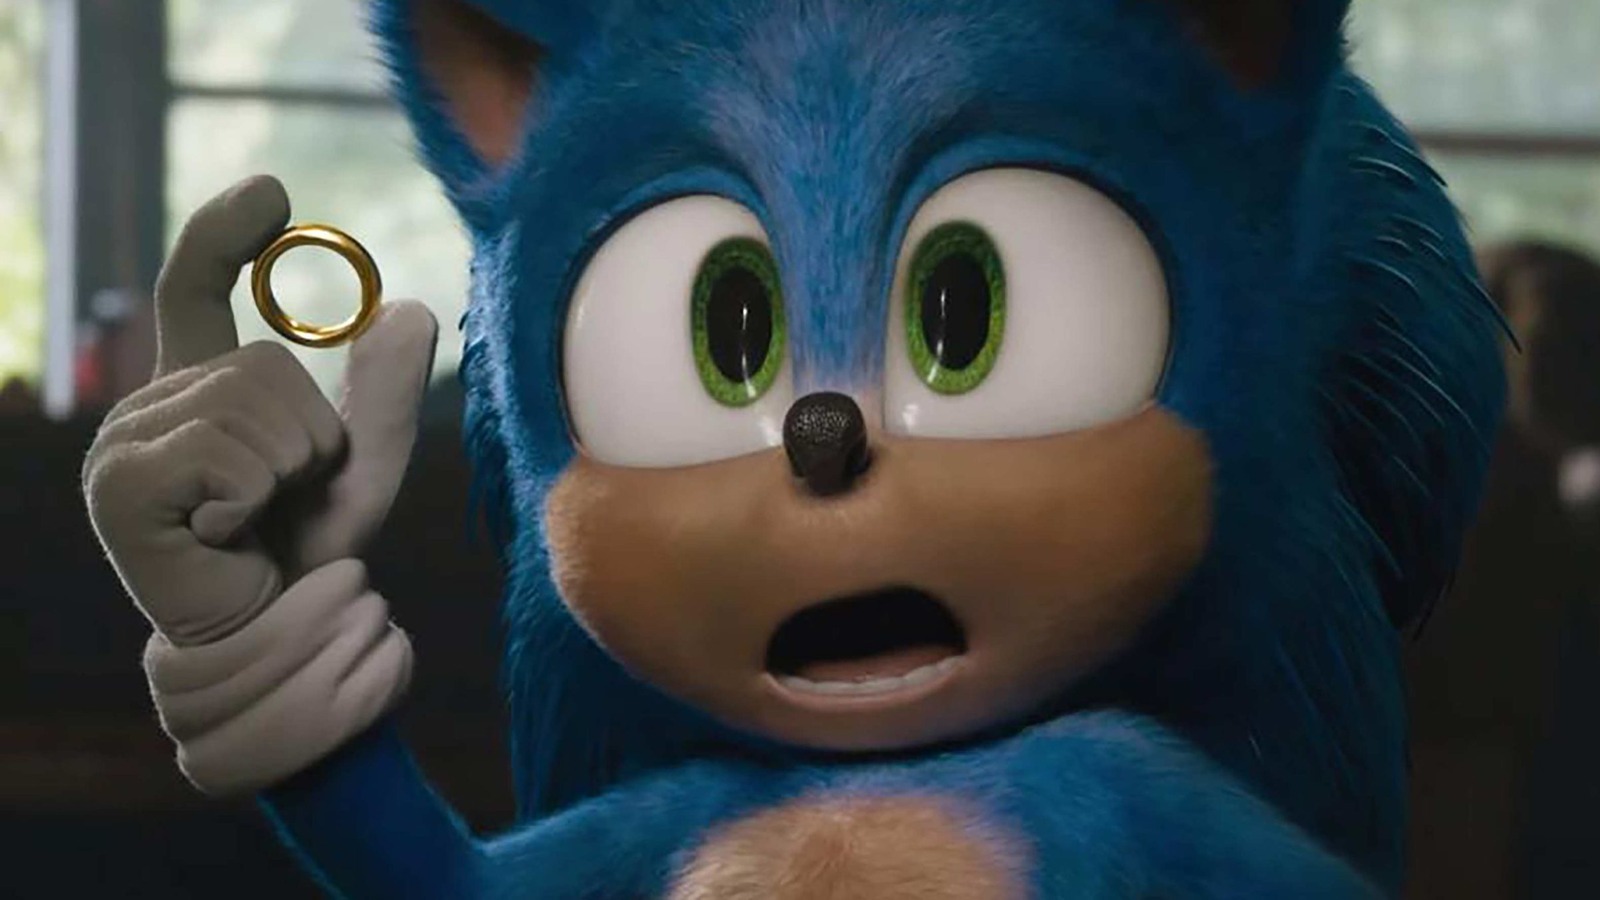 Sonic the Hedgehog 2' Turns Video-Game Lore Into Hollywood Joy